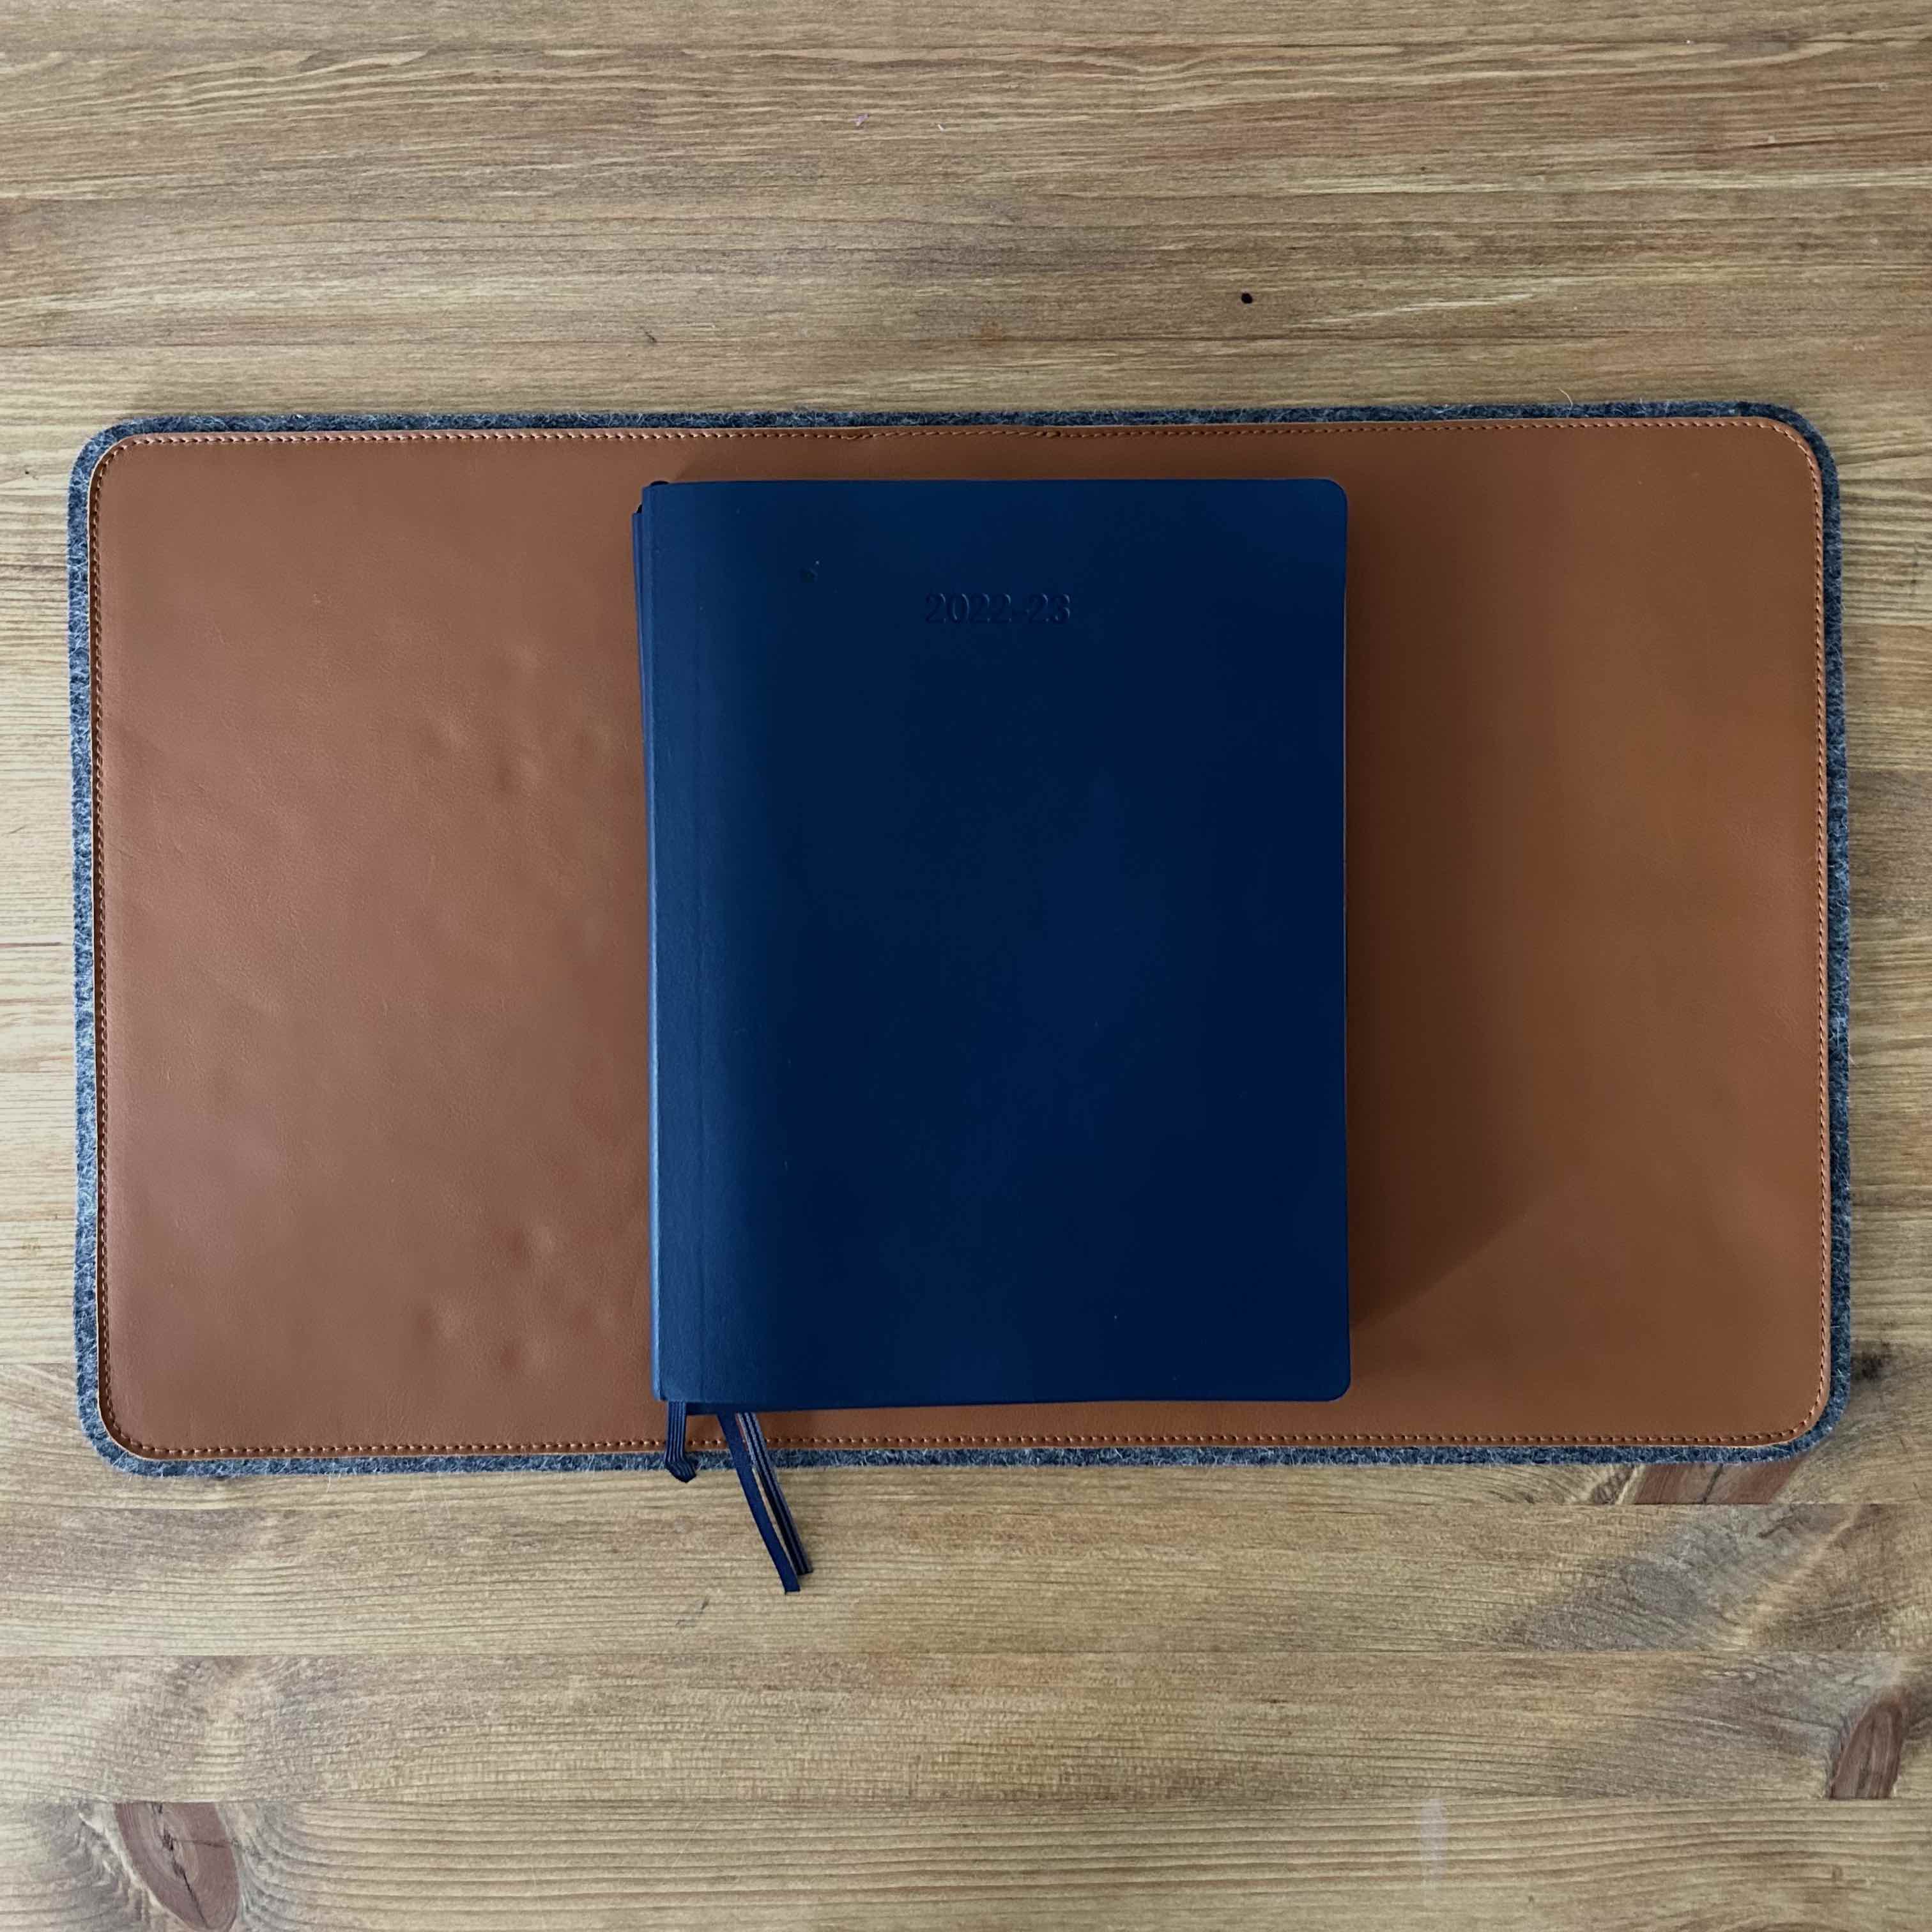 Grovemade Matte Desk Pad review: The ultimate work surface - General  Discussion Discussions on AppleInsider Forums